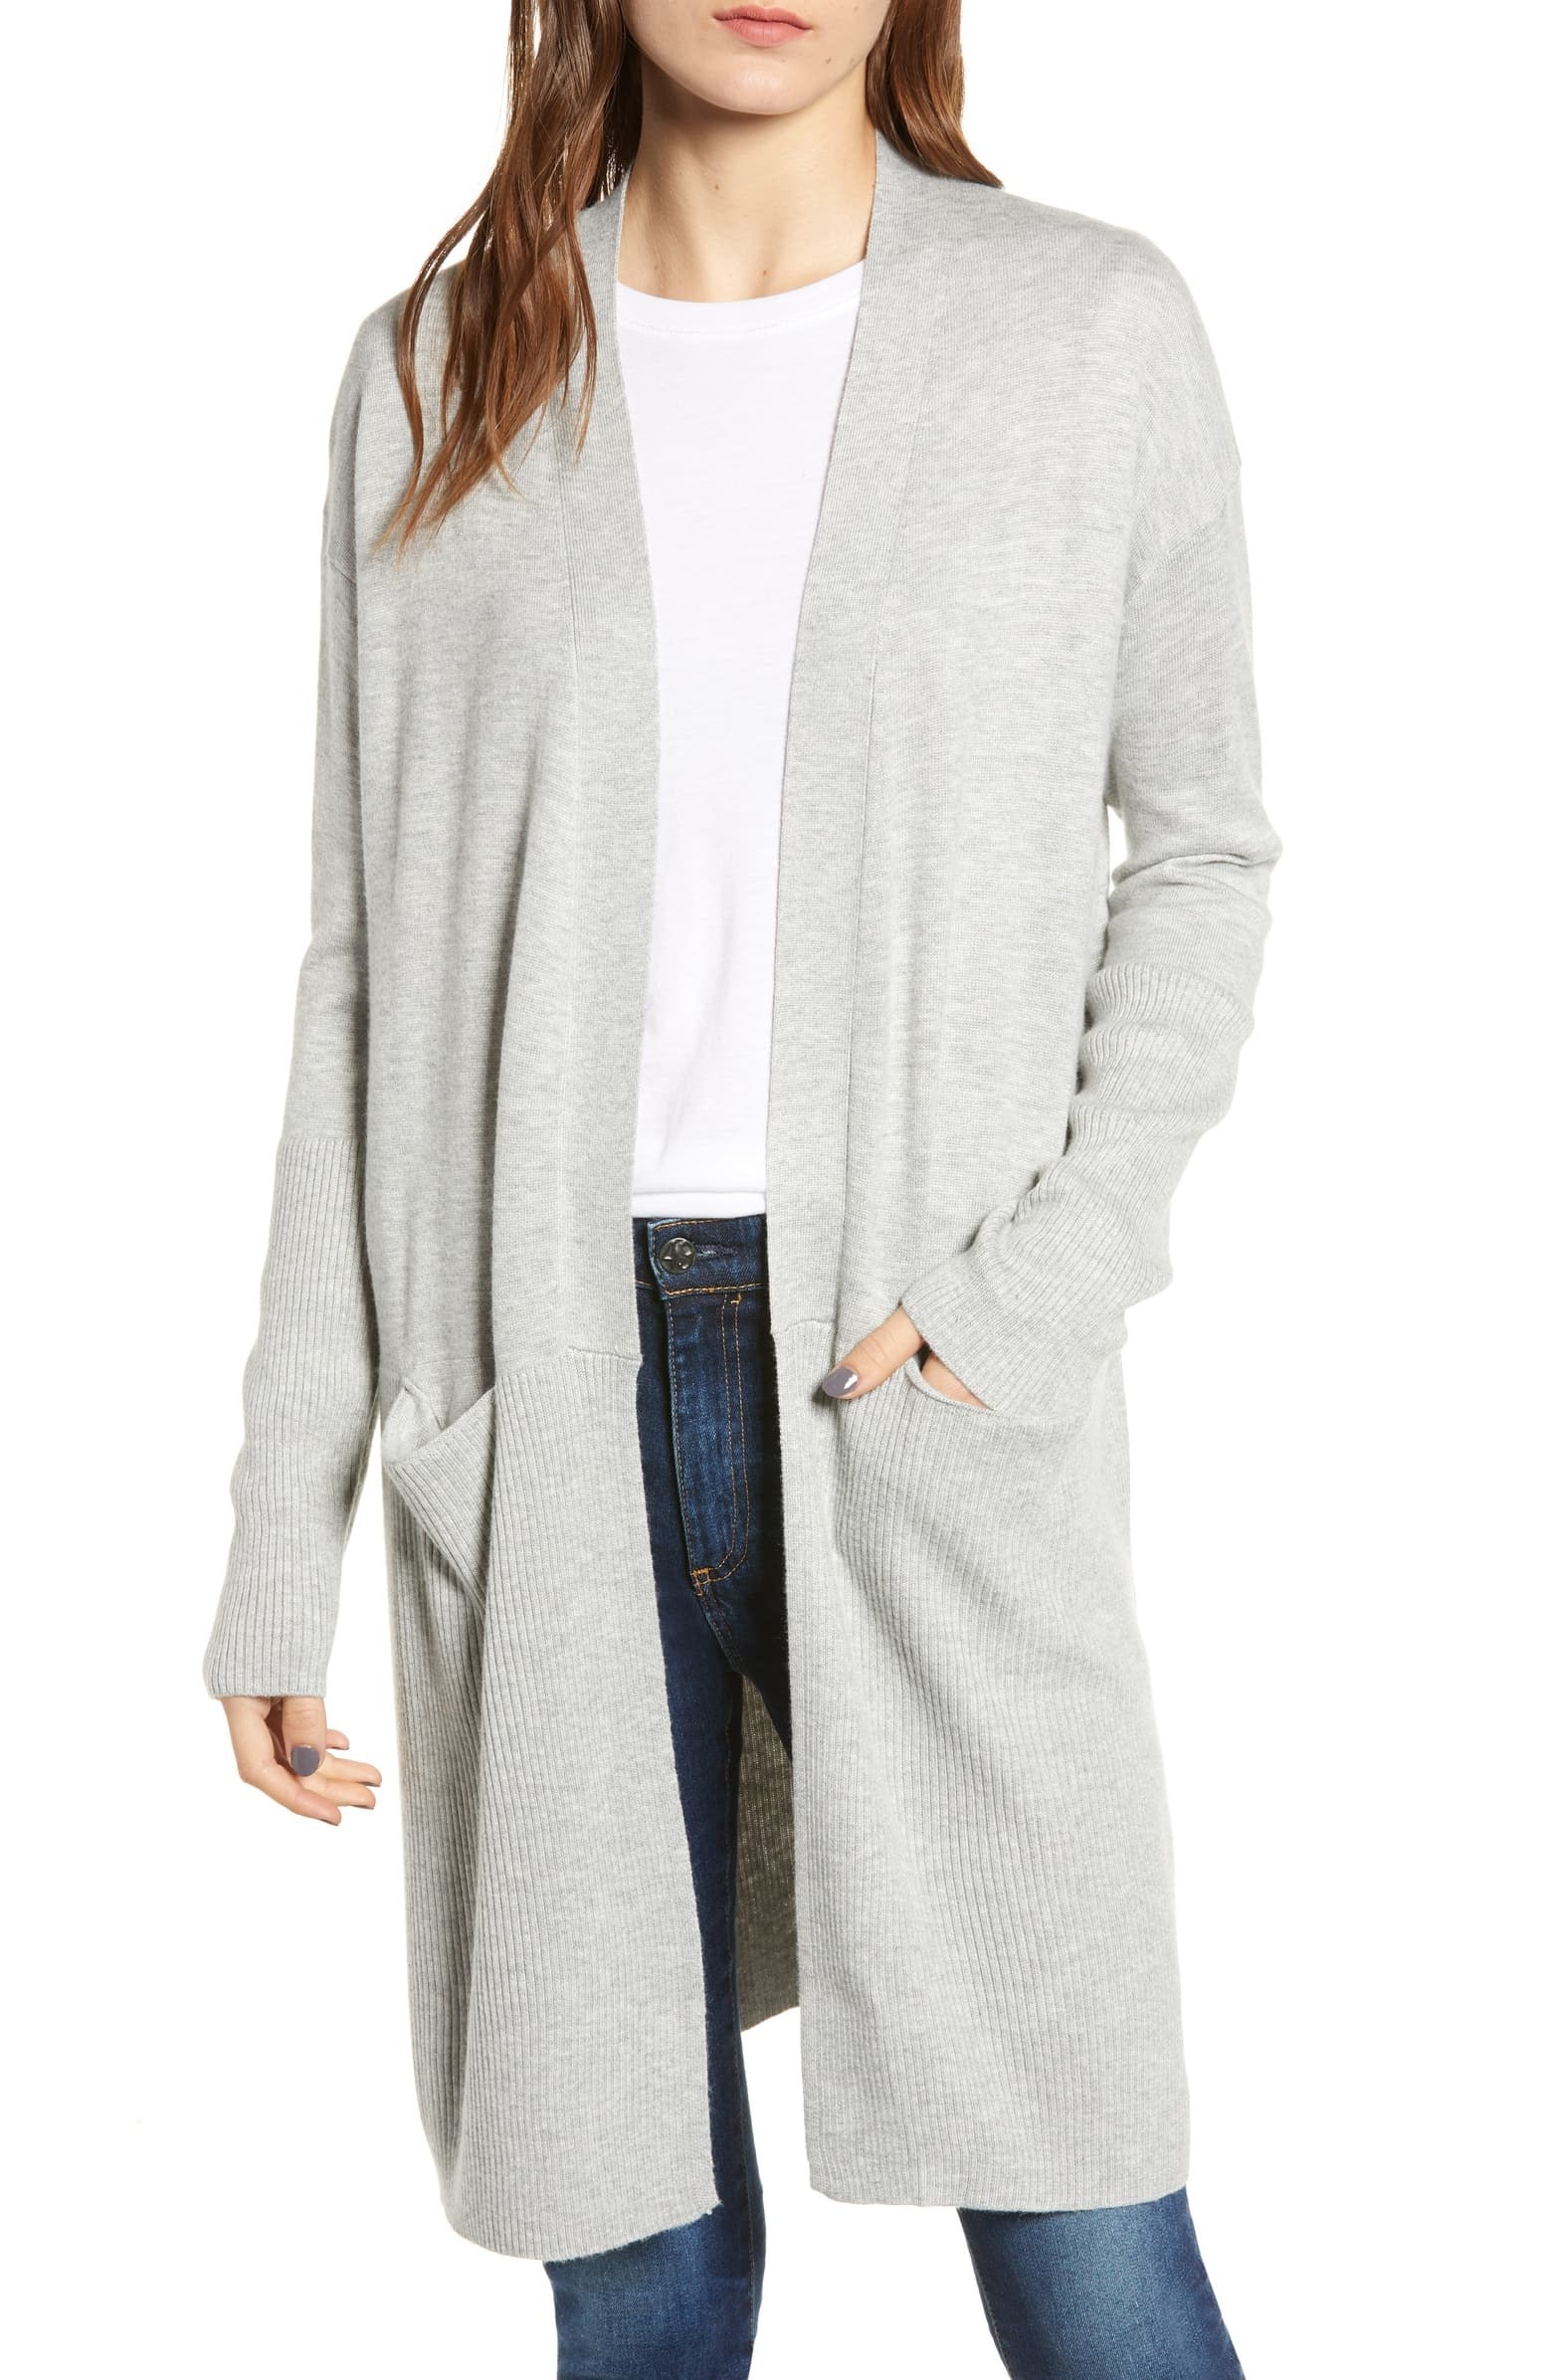 31 Things For Anyone Who Just Wants To Be Cozy All The Time